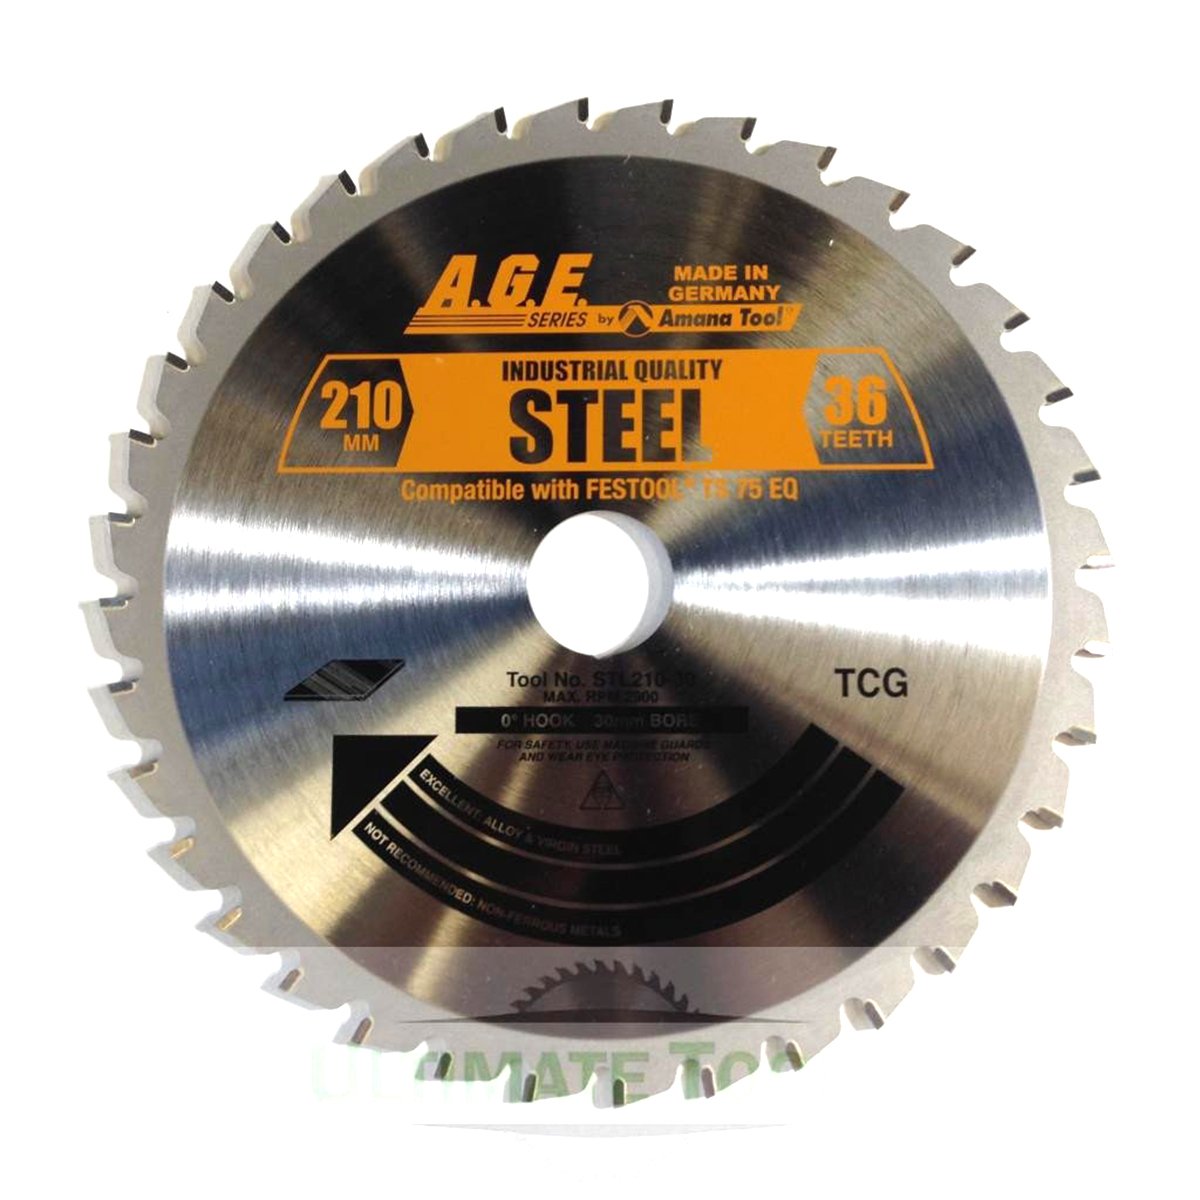 36-tooth TCG saw blade for cutting steel with a track saw. 210mm with 30mm arbor hole fits Festool TS 75 plunge saws.